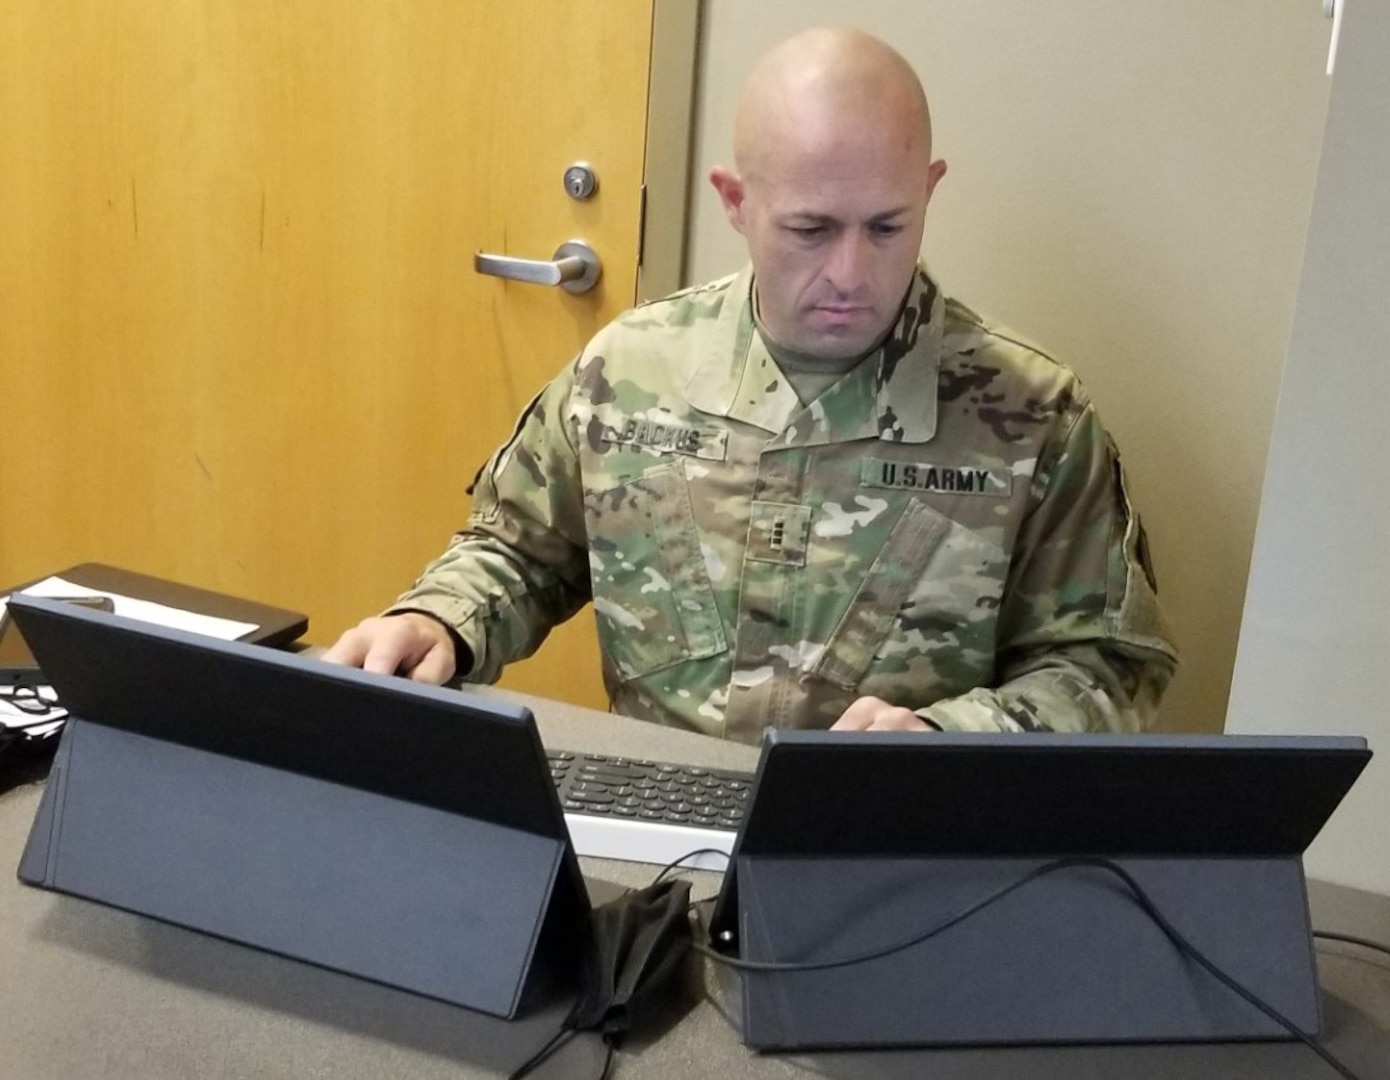 Army Chief Warrant Officer 3 Gregory Backus, an information protection technician with the Army National Guard’s Professional Education Center, initiates a cyberattack on the computer networks of students participating in Interactive War Games, a cyber awareness event at Arkansas State University-Beebe, April 28, 2021. Backus was showing students what a cyberattack looked like as they were participating in simulated battlefield drills from laptop computers.